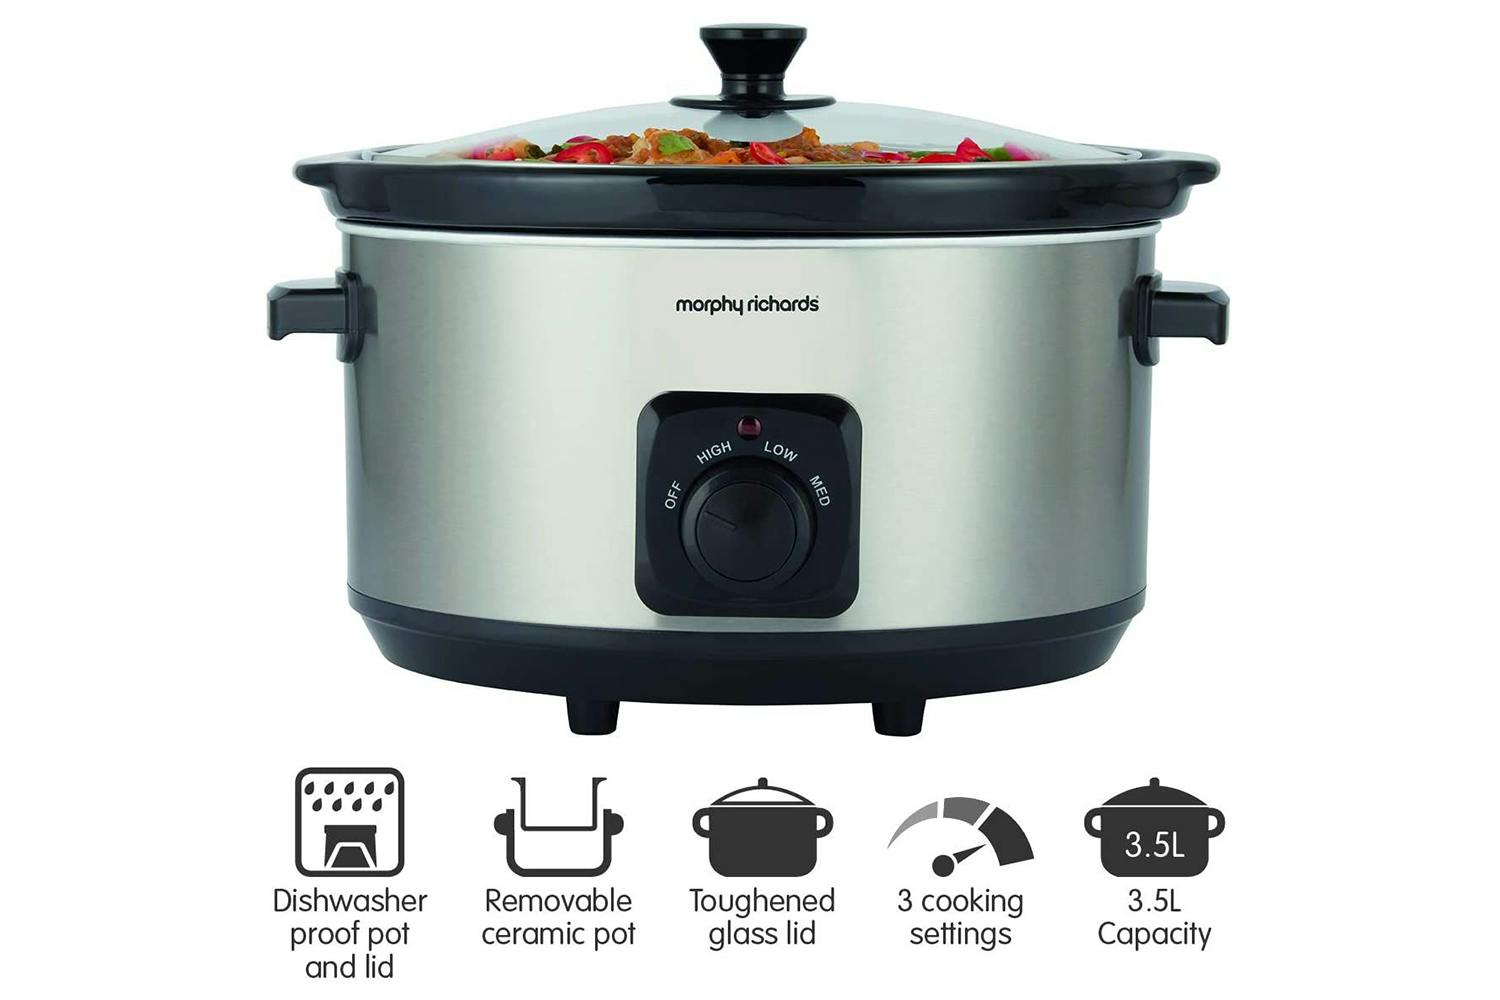 https://hniesfp.imgix.net/8/images/detailed/238/Cooker_Morphy_Richards_461013_1.jpg?fit=fill&bg=0FFF&w=1500&h=1000&auto=format,compress